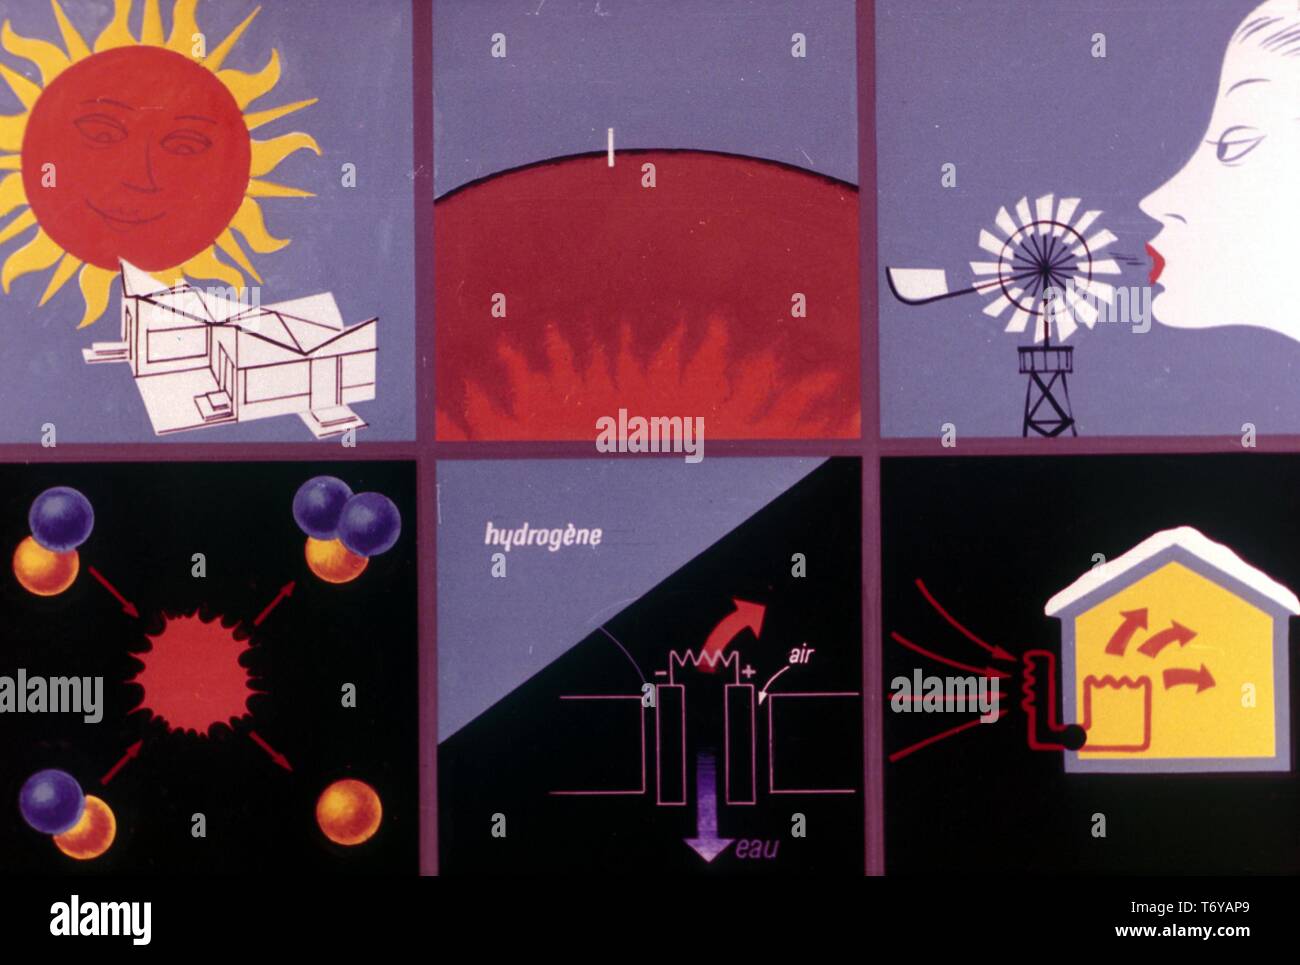 Infographic, labeled in French, showing different ways to derive energy including wind, nuclear, hydroelectric, and solar power, 1975. Image courtesy US Department of Energy. () Stock Photo